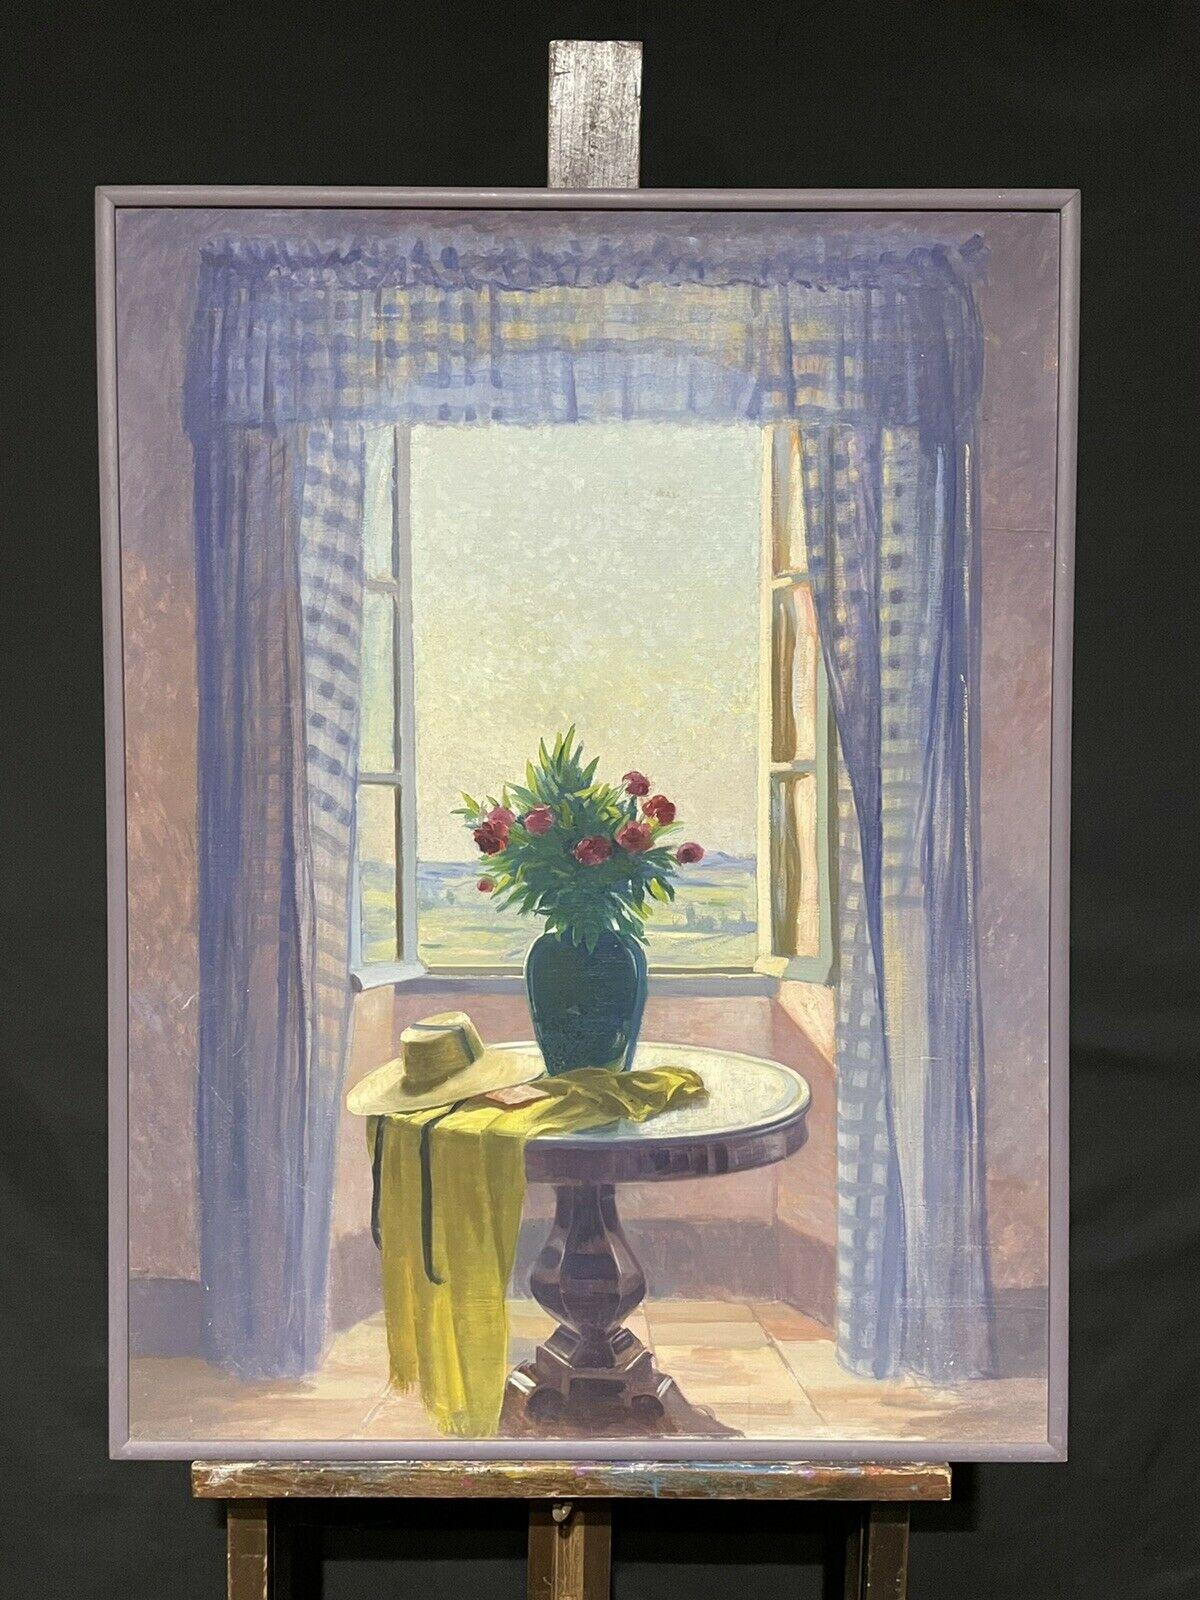 HUGE 1980'S FRENCH IMPRESSIONIST OIL - FLOWERS INTERIOR LOOKING OUT OF WINDOW - Painting by Unknown